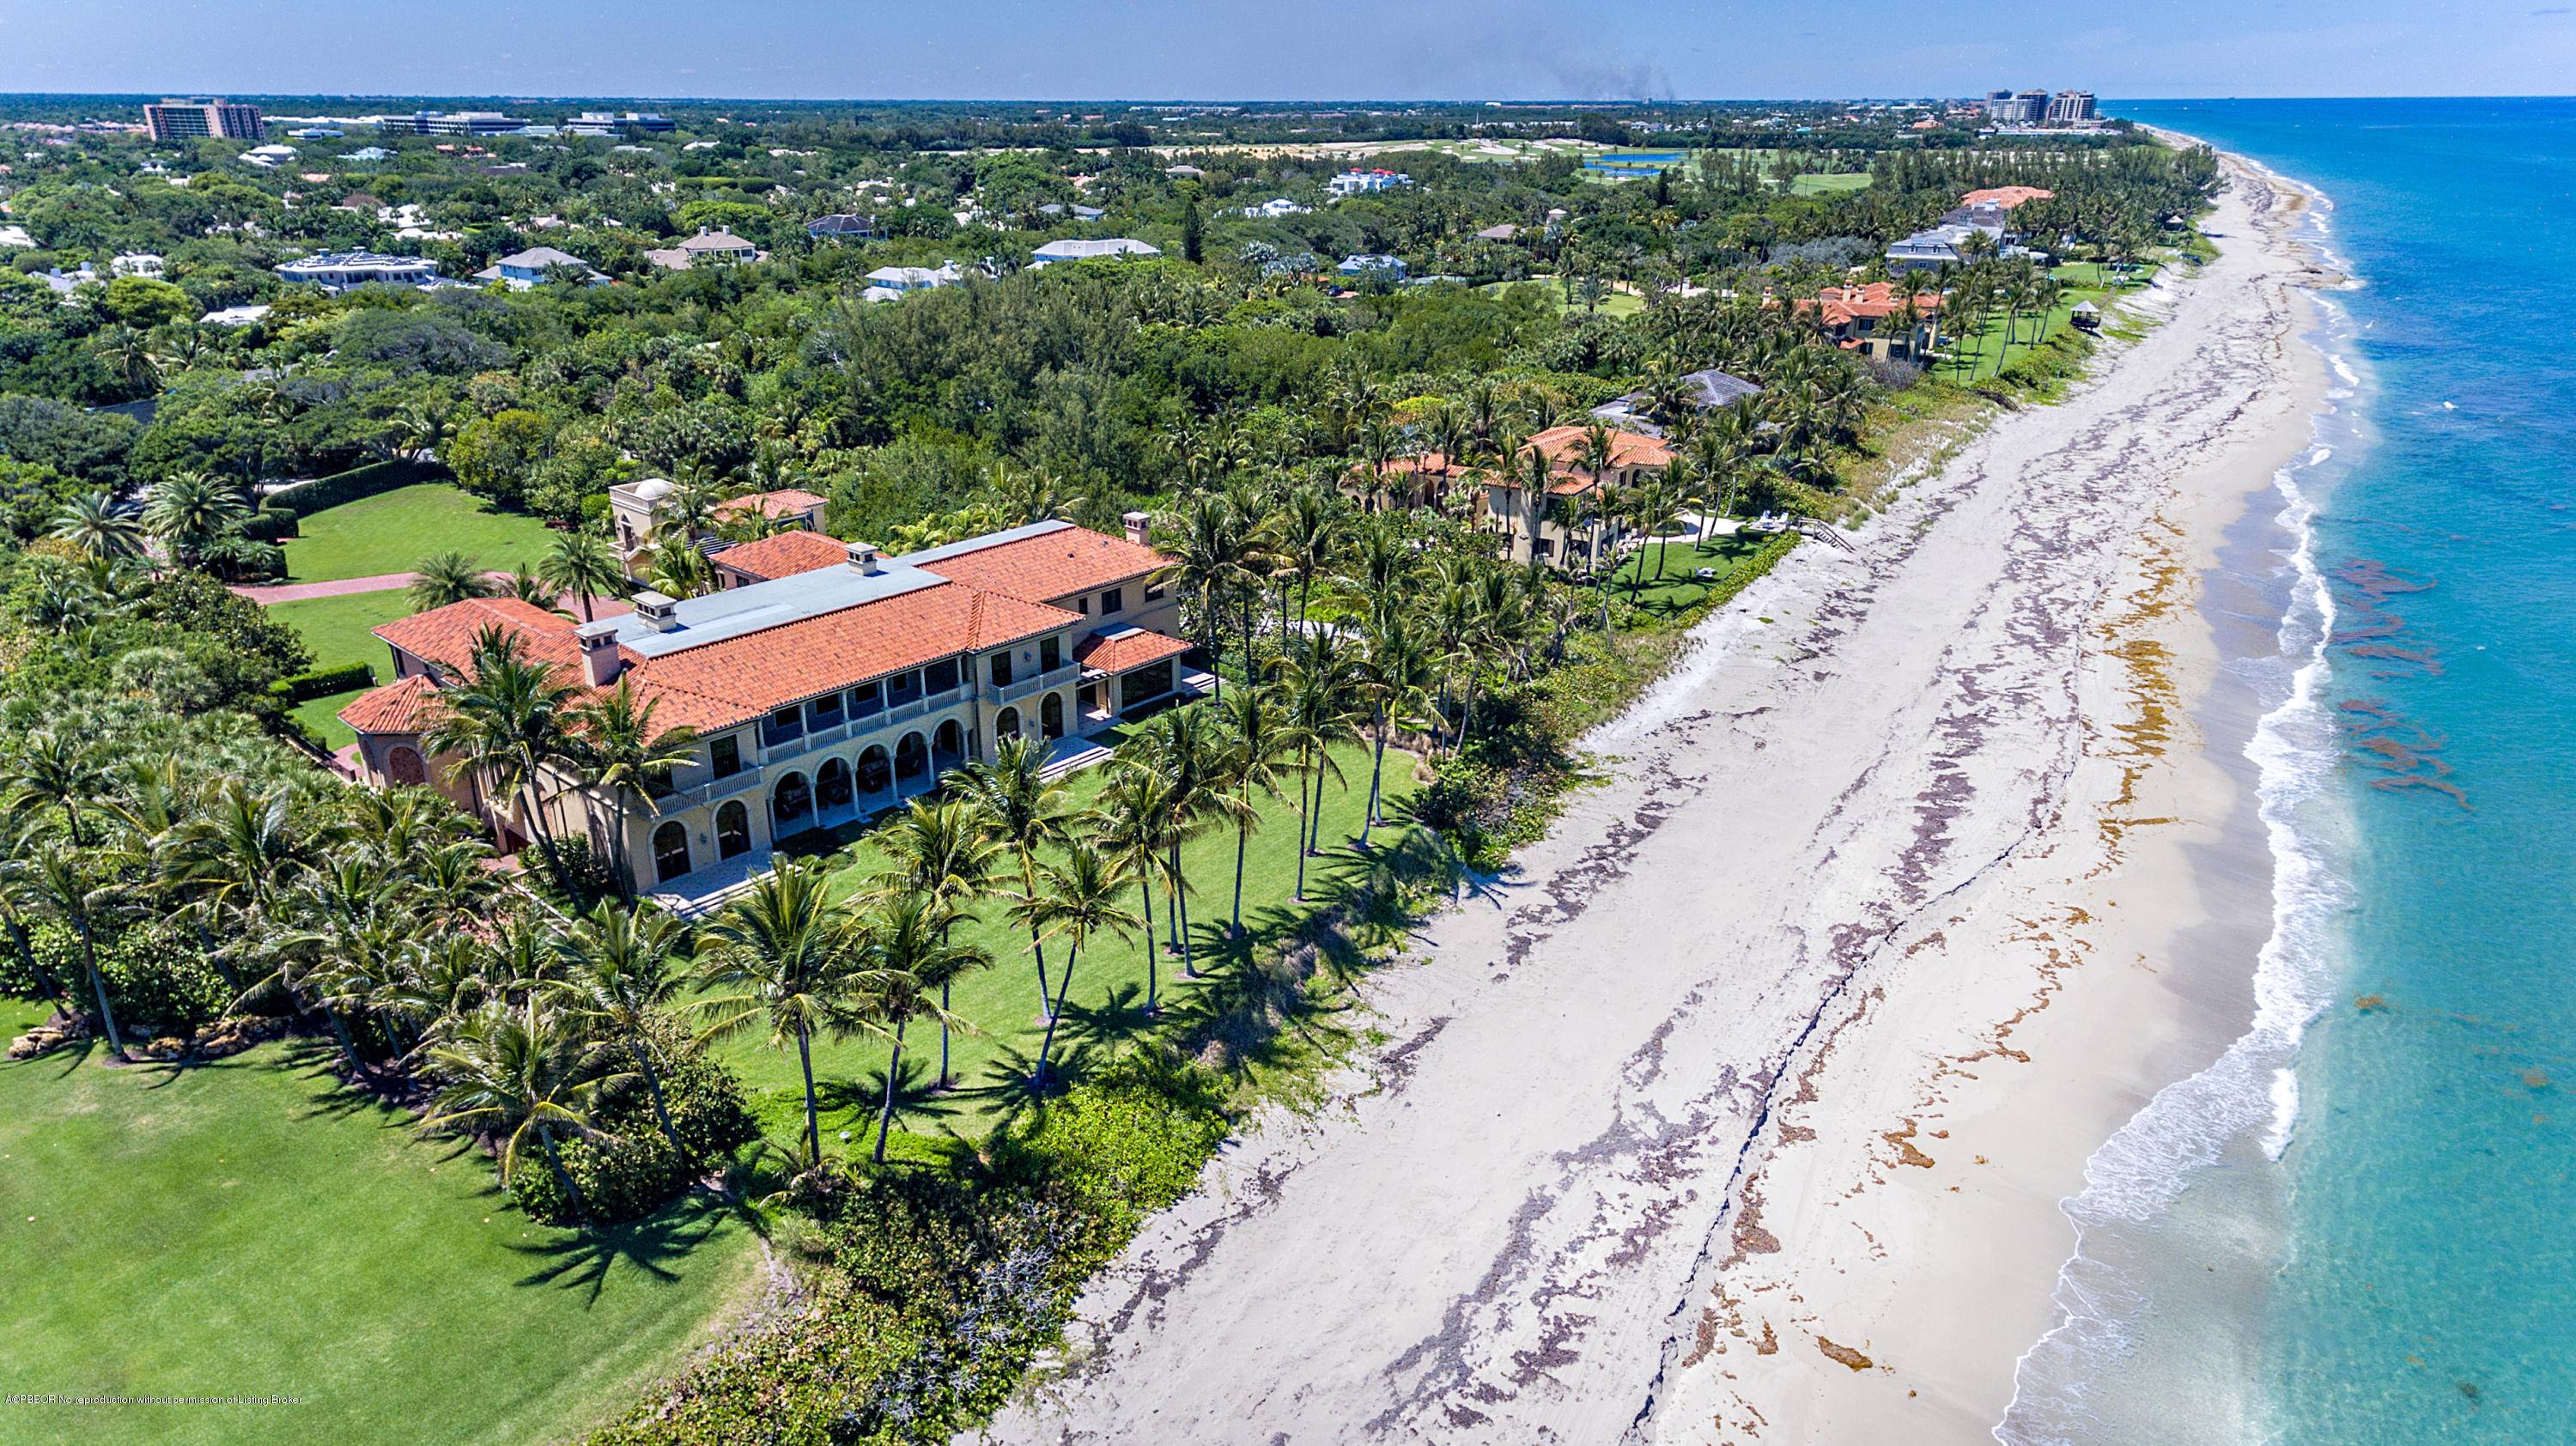 Nestled on a secluded stretch of Seminole beach and lining the azure waters of the Atlantic ocean stands one of South Florida's most prestigious oceanfront estates, Bel Viaggio.